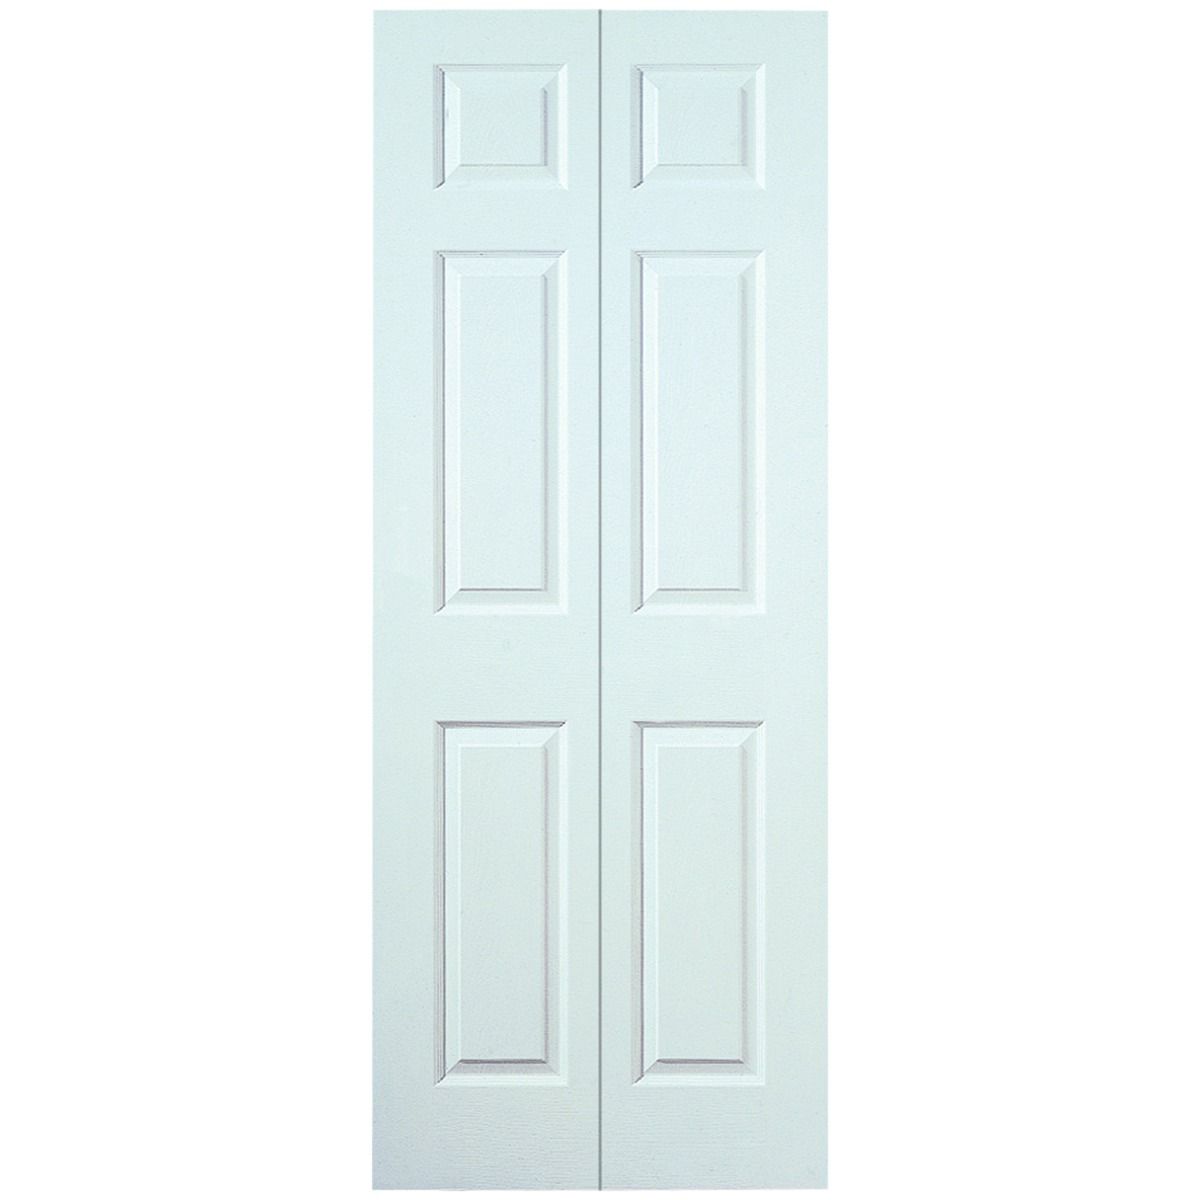 Wickes Lincoln White Grained Moulded 6 Panel Internal Bi-Fold Door - 1939mm